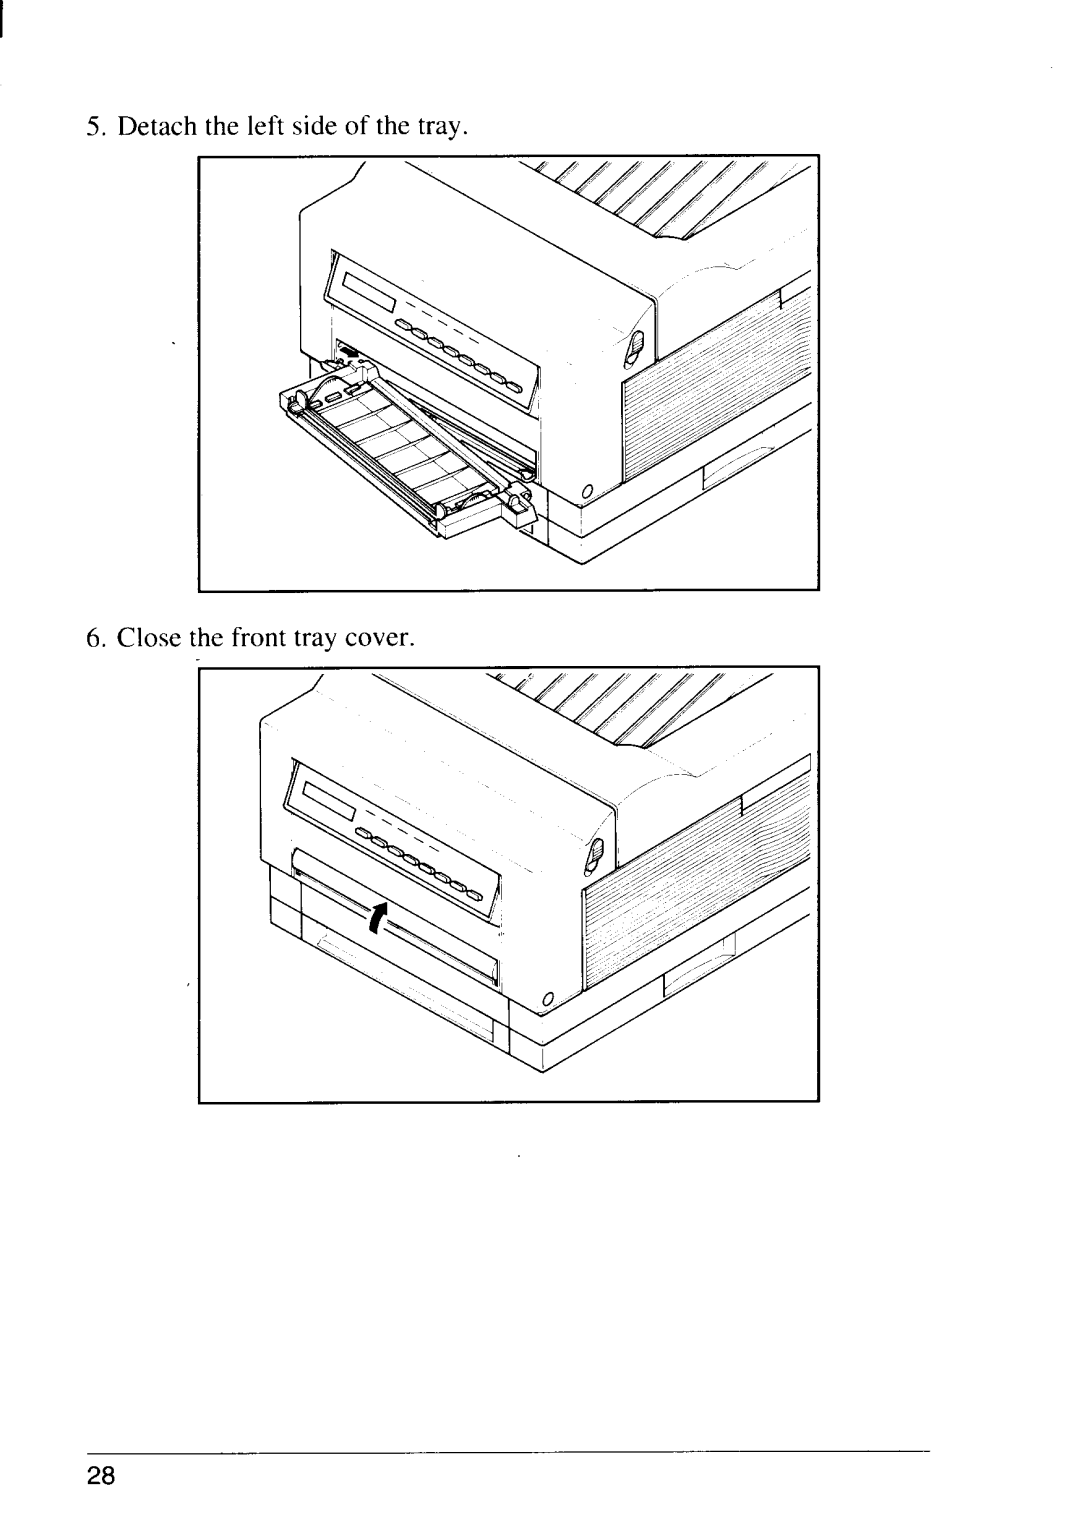 Star Micronics LS-5 EX, LS-5 TT operation manual Detach the left side of the tray 6. Close the front tray cover 